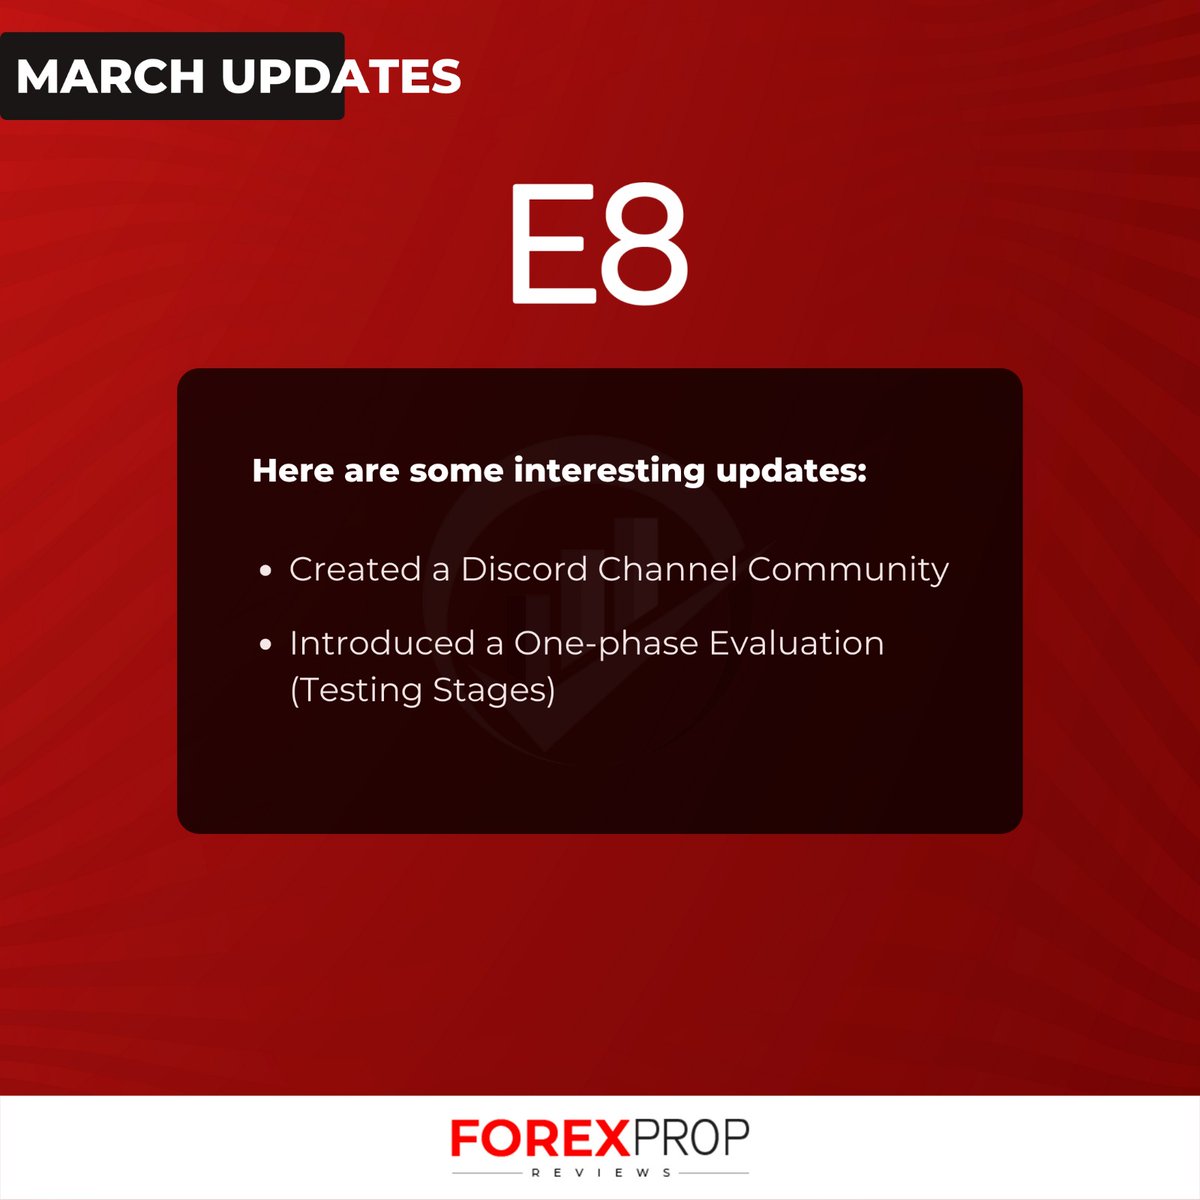 🔥 Keep up with the latest updates of E8 Markets, one of the top prop firms in the industry. Head over to our website now to discover their March updates and learn more about this leading firm.
#PropFirms #ForexPropReviews #E8Markets #MarchUpdates #Forex